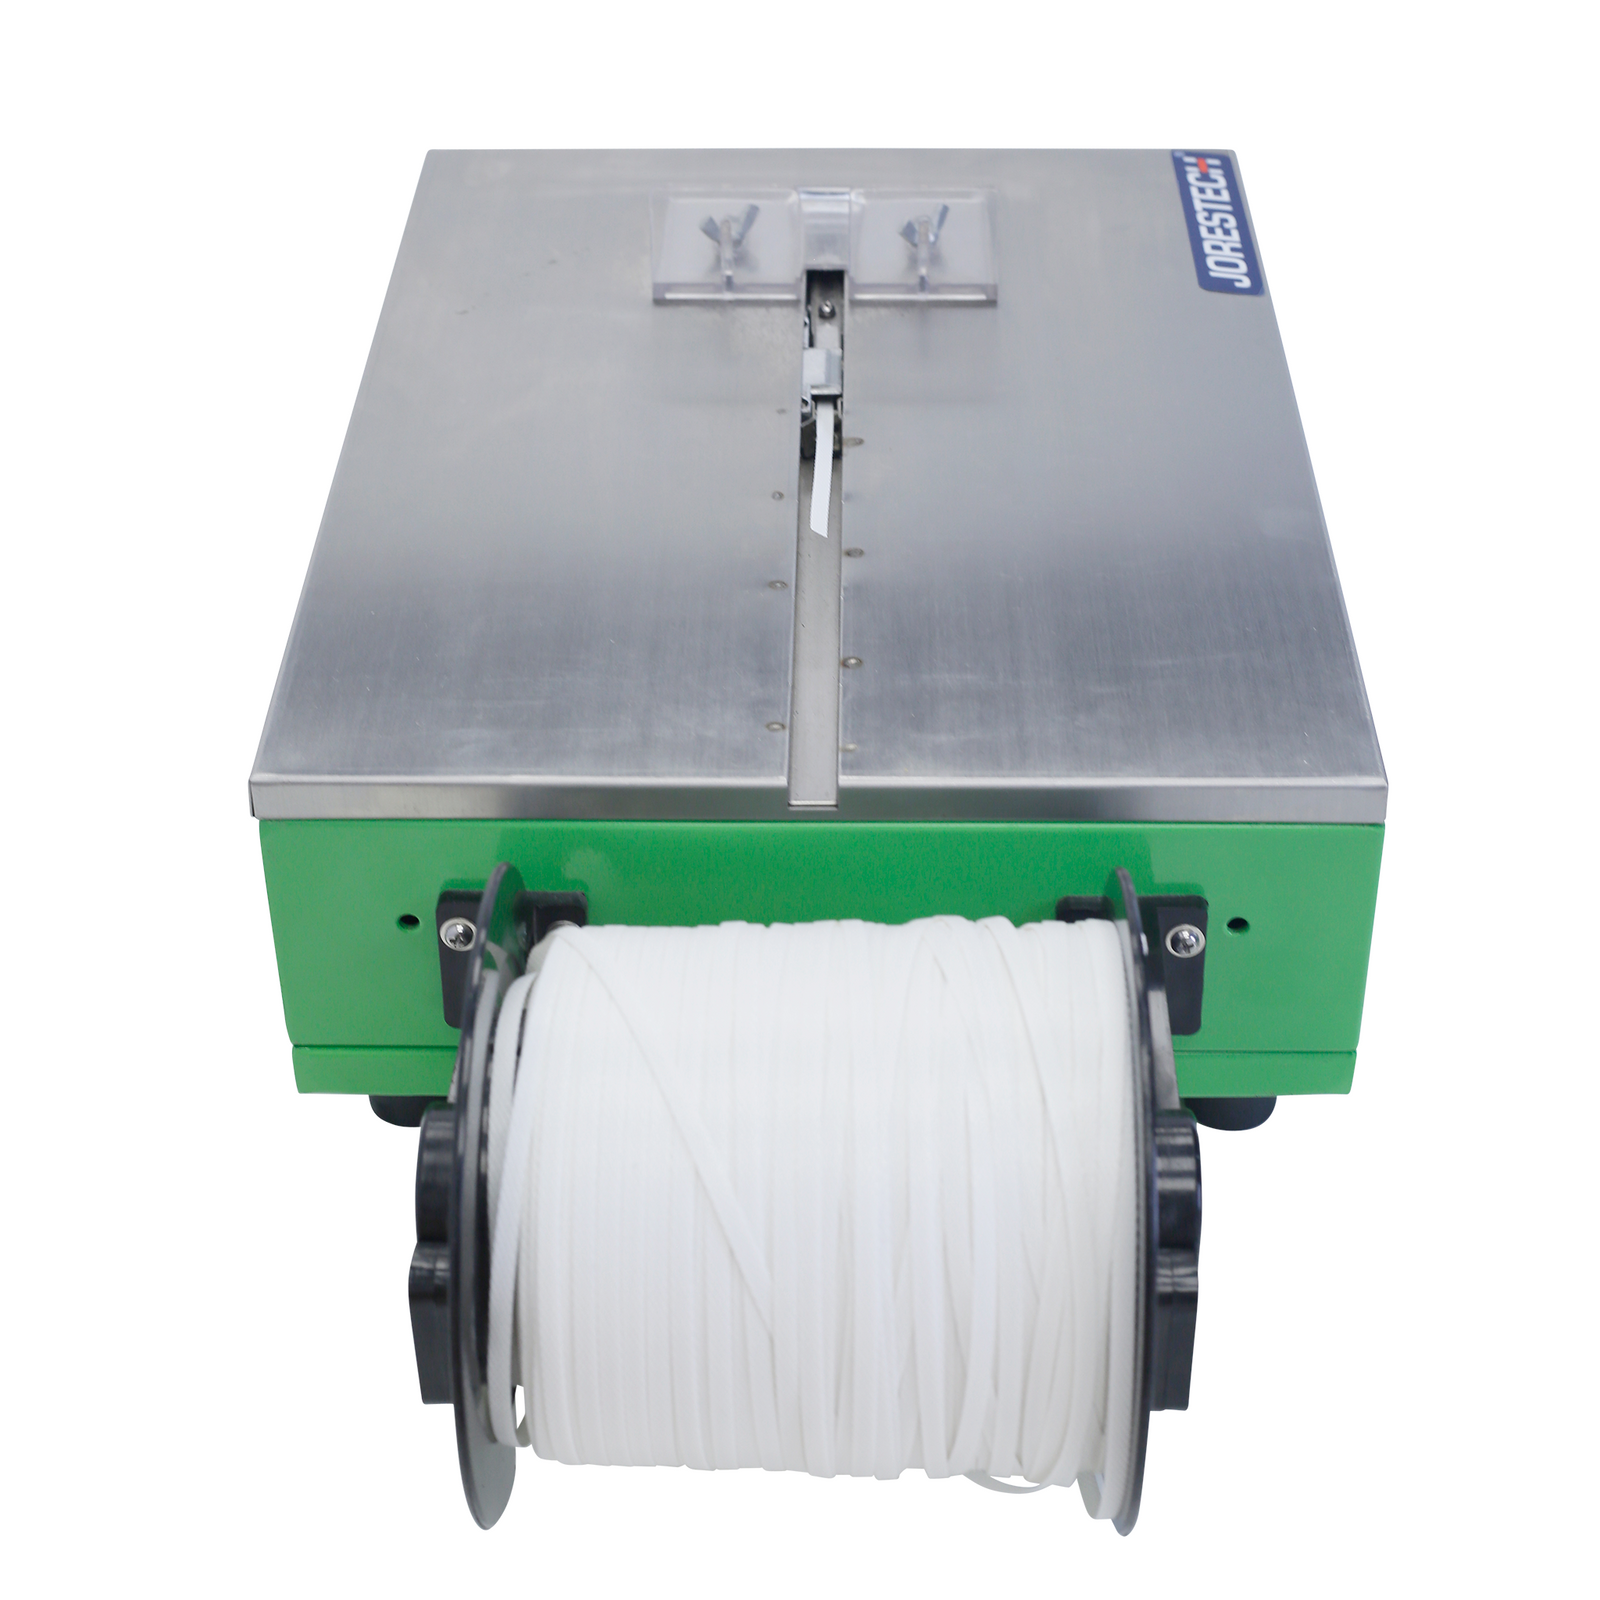 Top view of the JORES TECHNOLOGIES® Tabletop strapper machine shows the machine's stainless steel work table. Strapping roll is installed on the machine